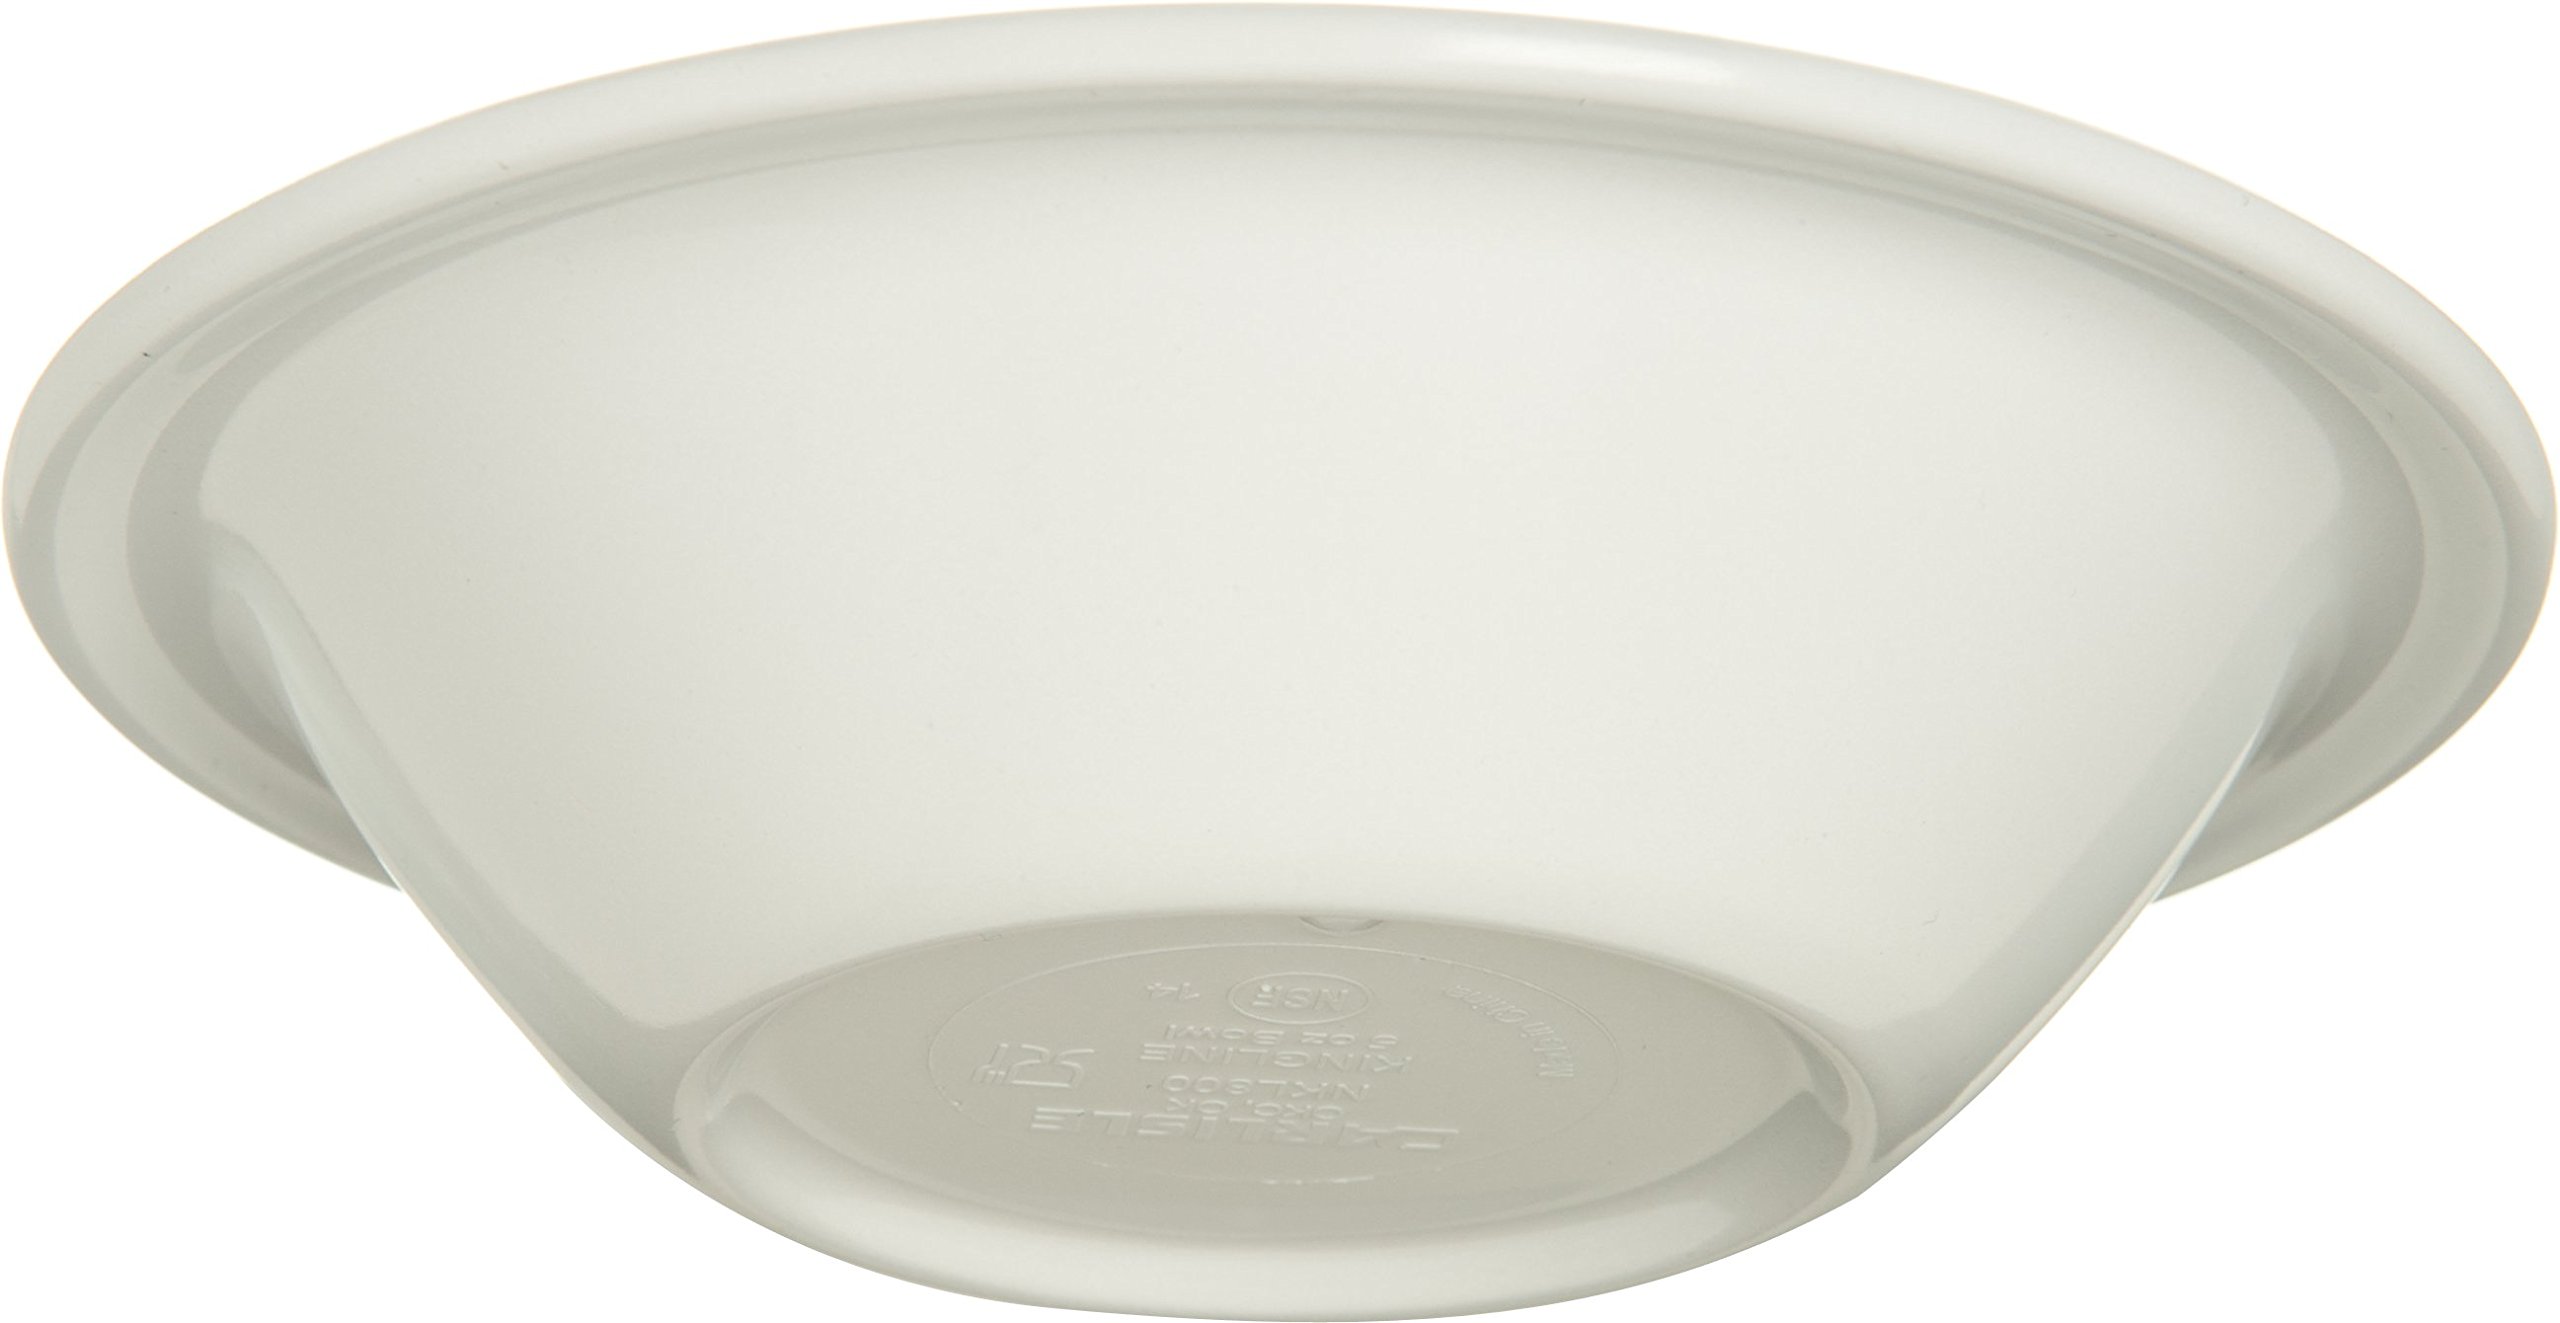 Carlisle FoodService Products Kingline Reusable Plastic Bowl Fruit Bowl for Home and Restaurant, Melamine, 5 Ounces, White